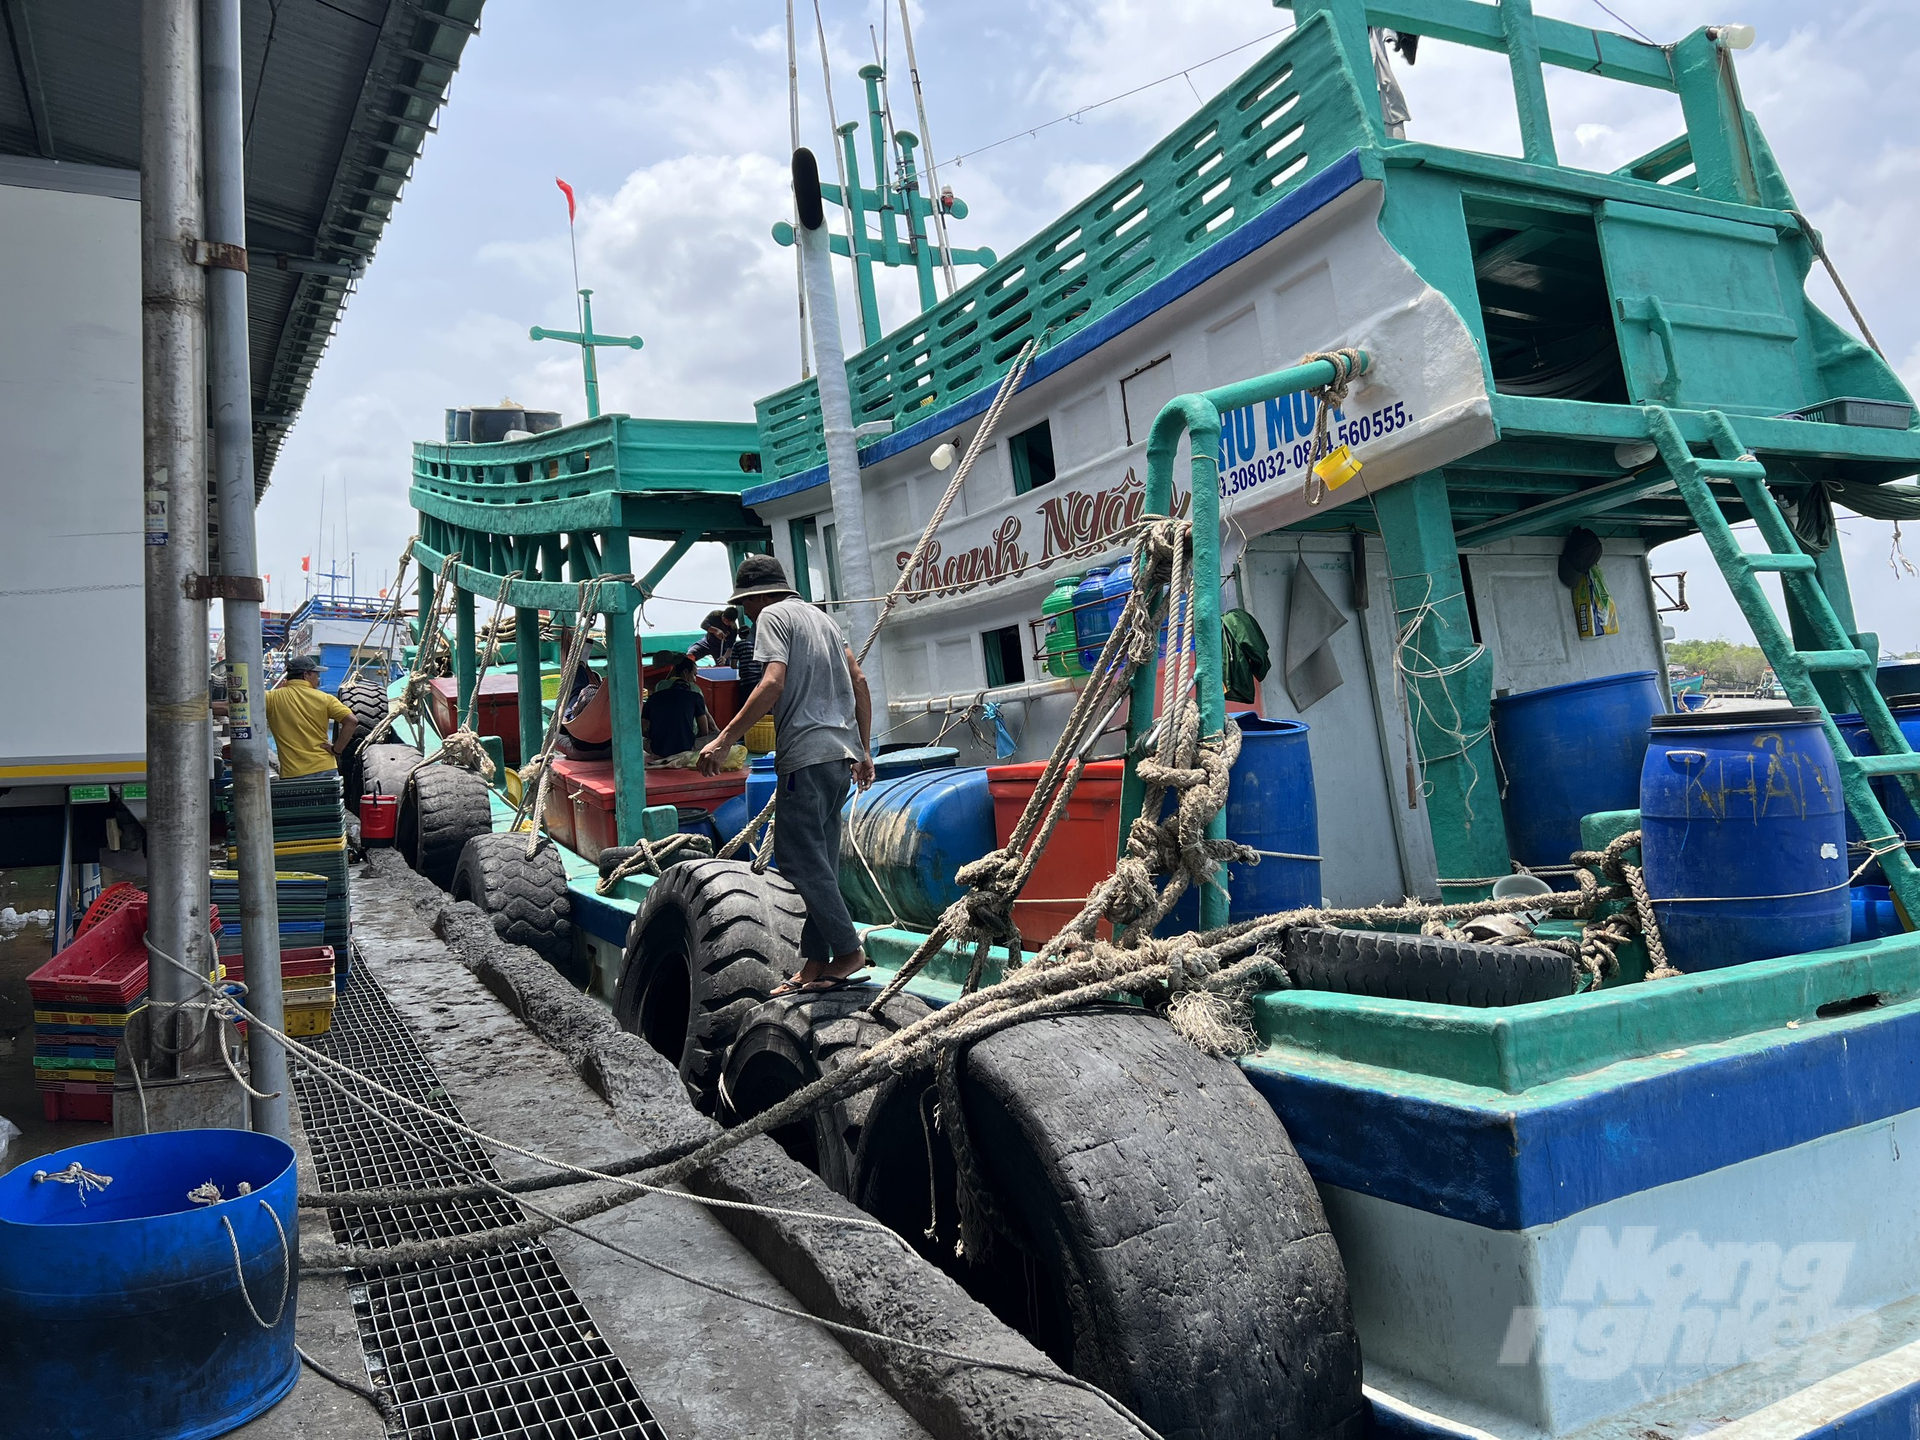 Every fisherman in the Ca Mau province has received regular promotion and campaigning against IUU fishing. Photo: Trong Linh.